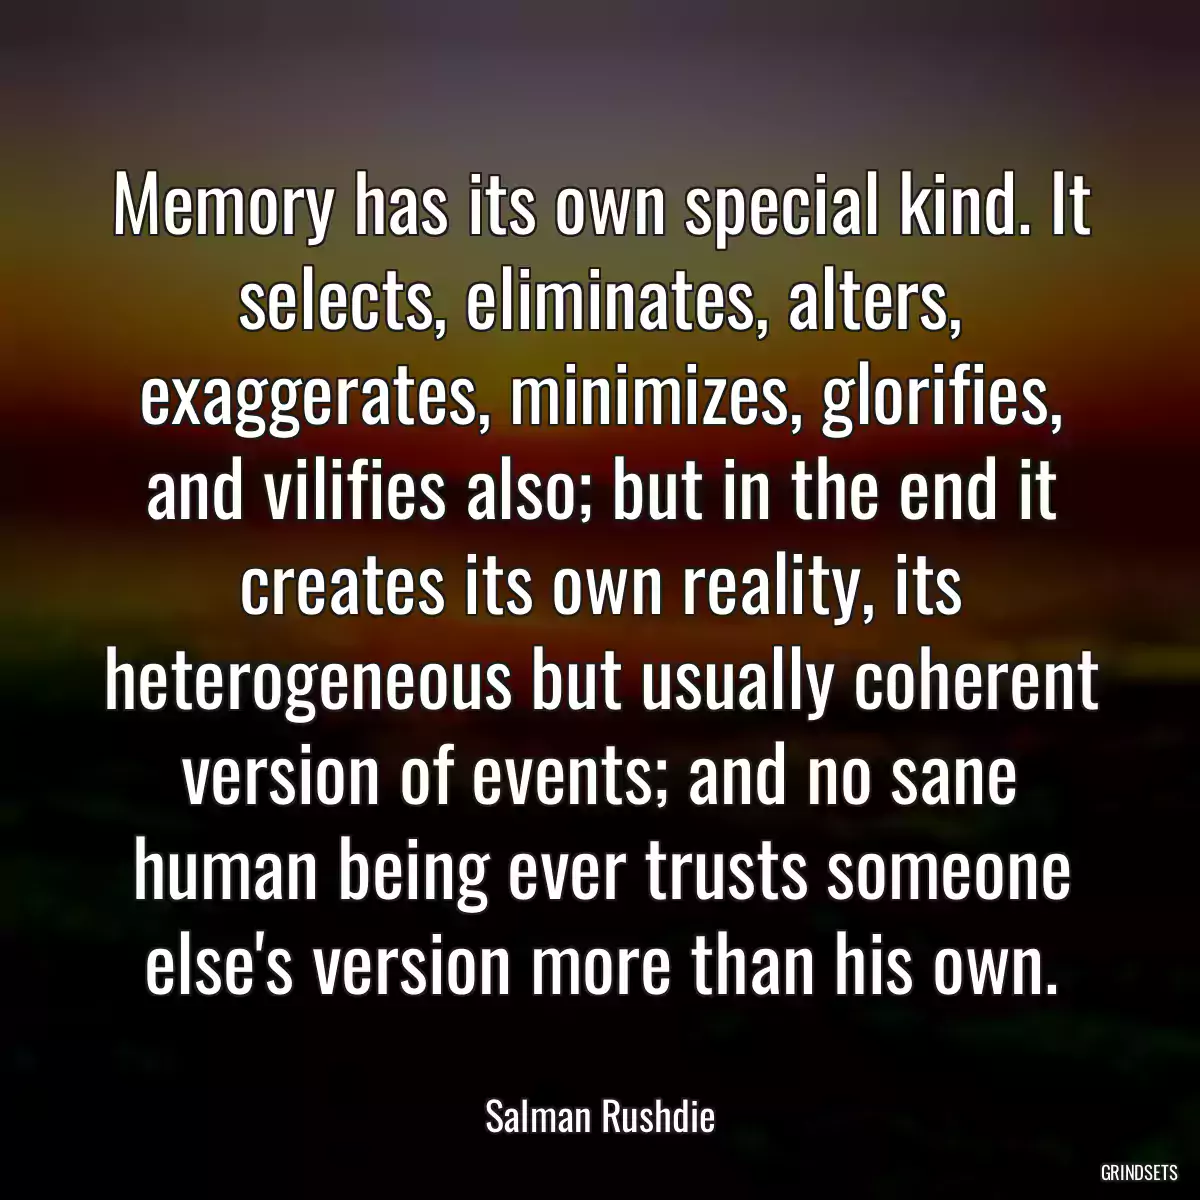 Memory has its own special kind. It selects, eliminates, alters, exaggerates, minimizes, glorifies, and vilifies also; but in the end it creates its own reality, its heterogeneous but usually coherent version of events; and no sane human being ever trusts someone else\'s version more than his own.